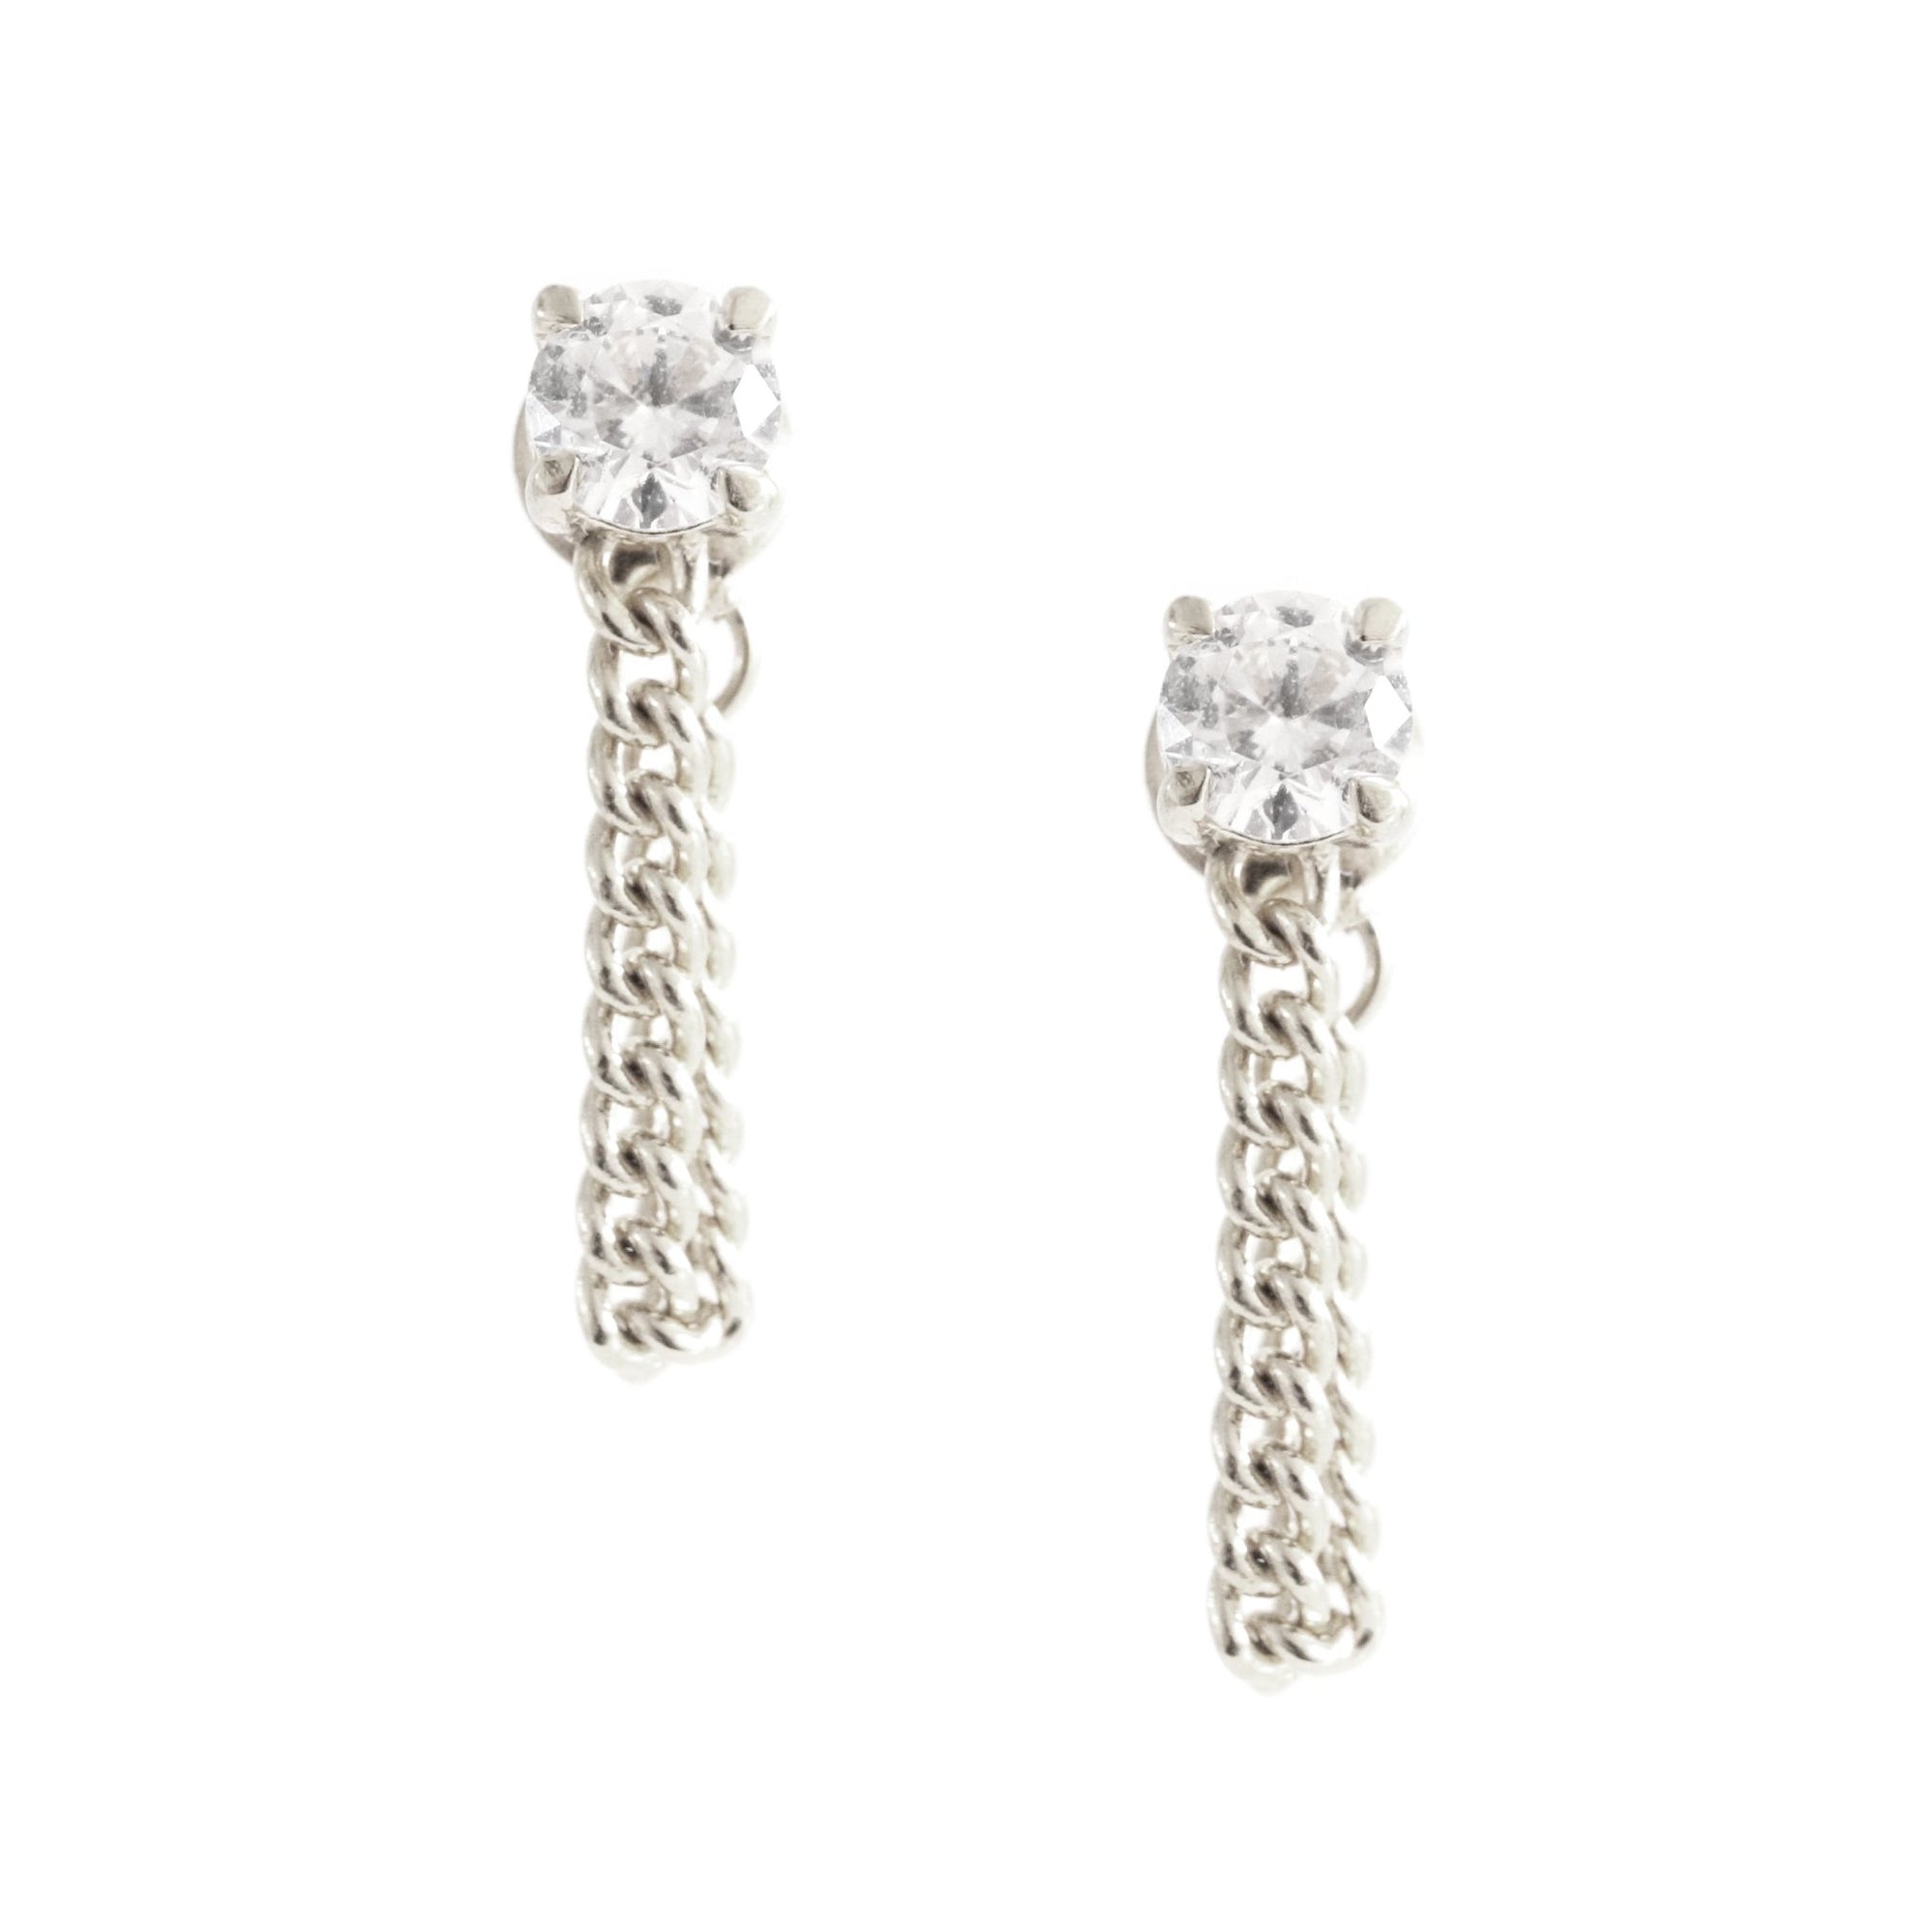 LOVE CABLE LINK CHAIN EARRINGS - CUBIC ZIRCONIA & SILVER - SO PRETTY CARA COTTER